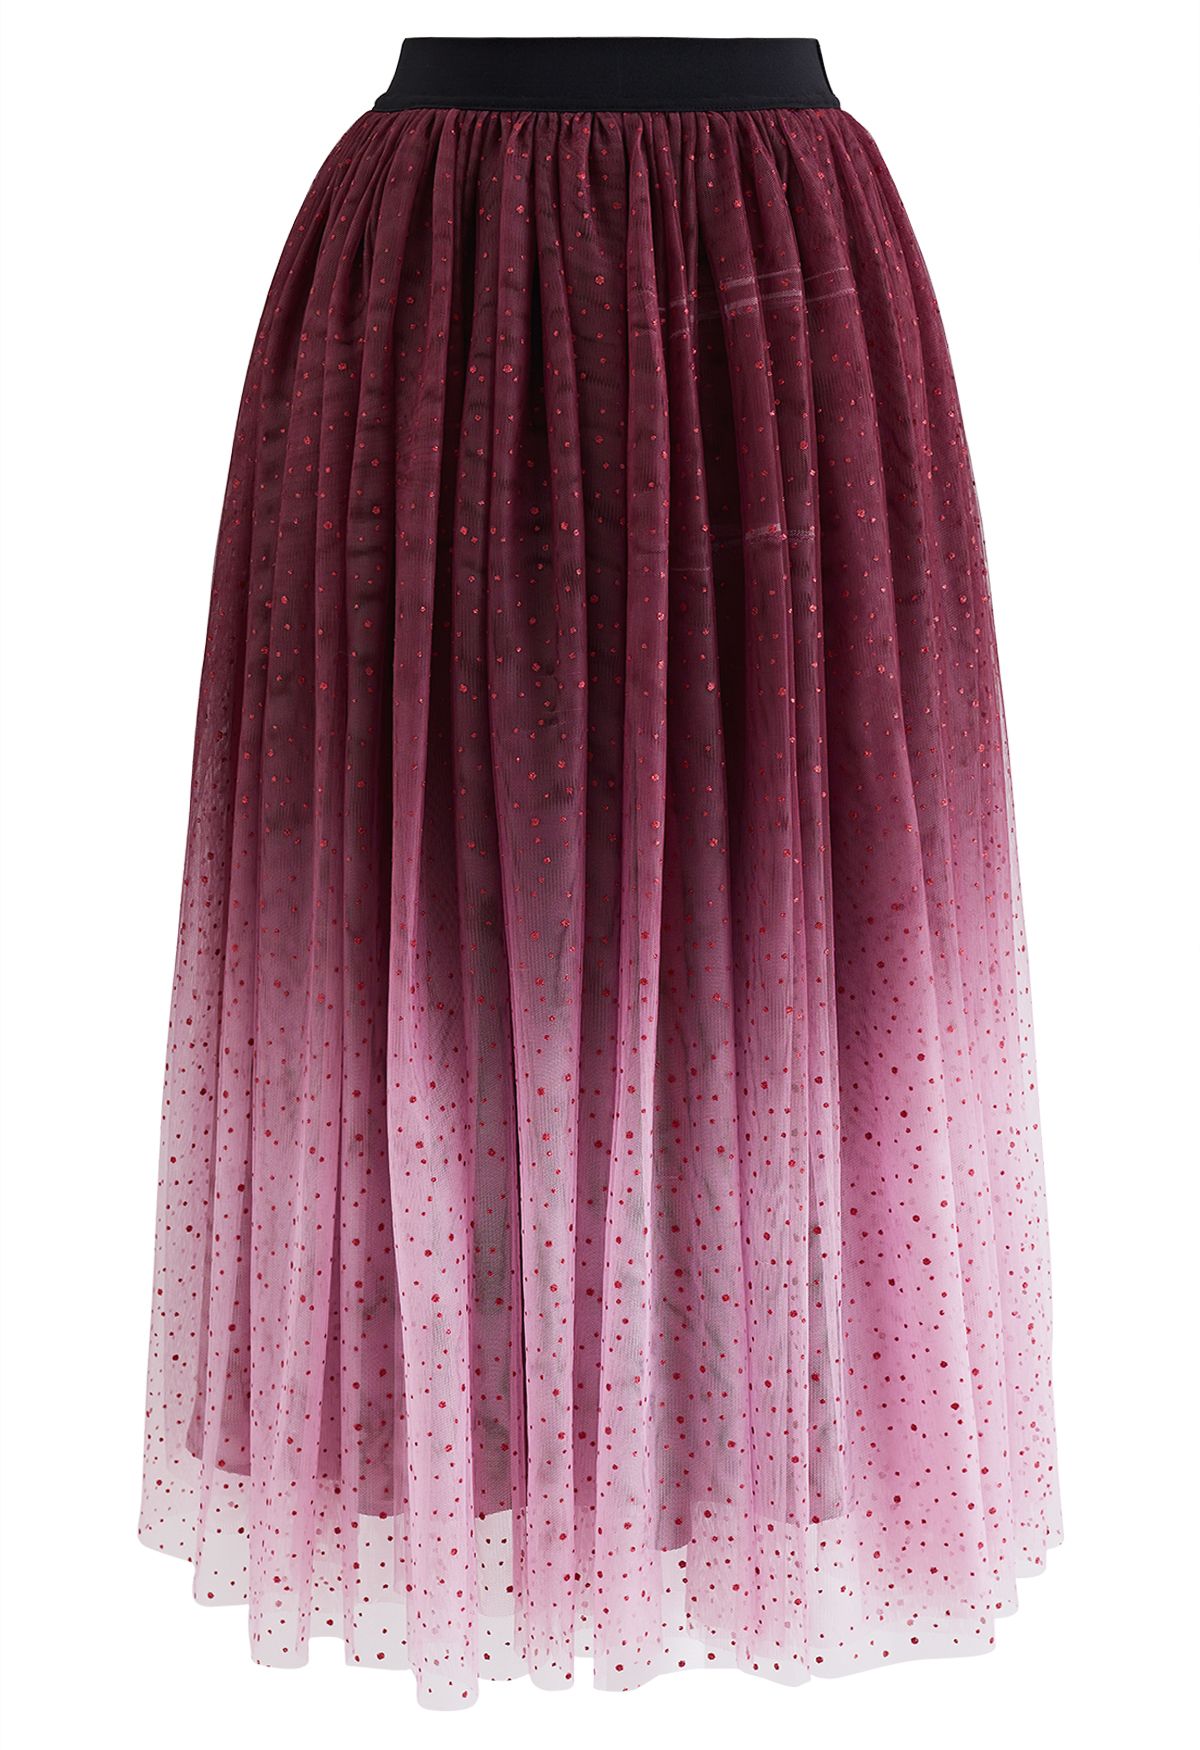 Festive Sparkle Ombre Tulle Midi Skirt in Burgundy - Retro, Indie and ...